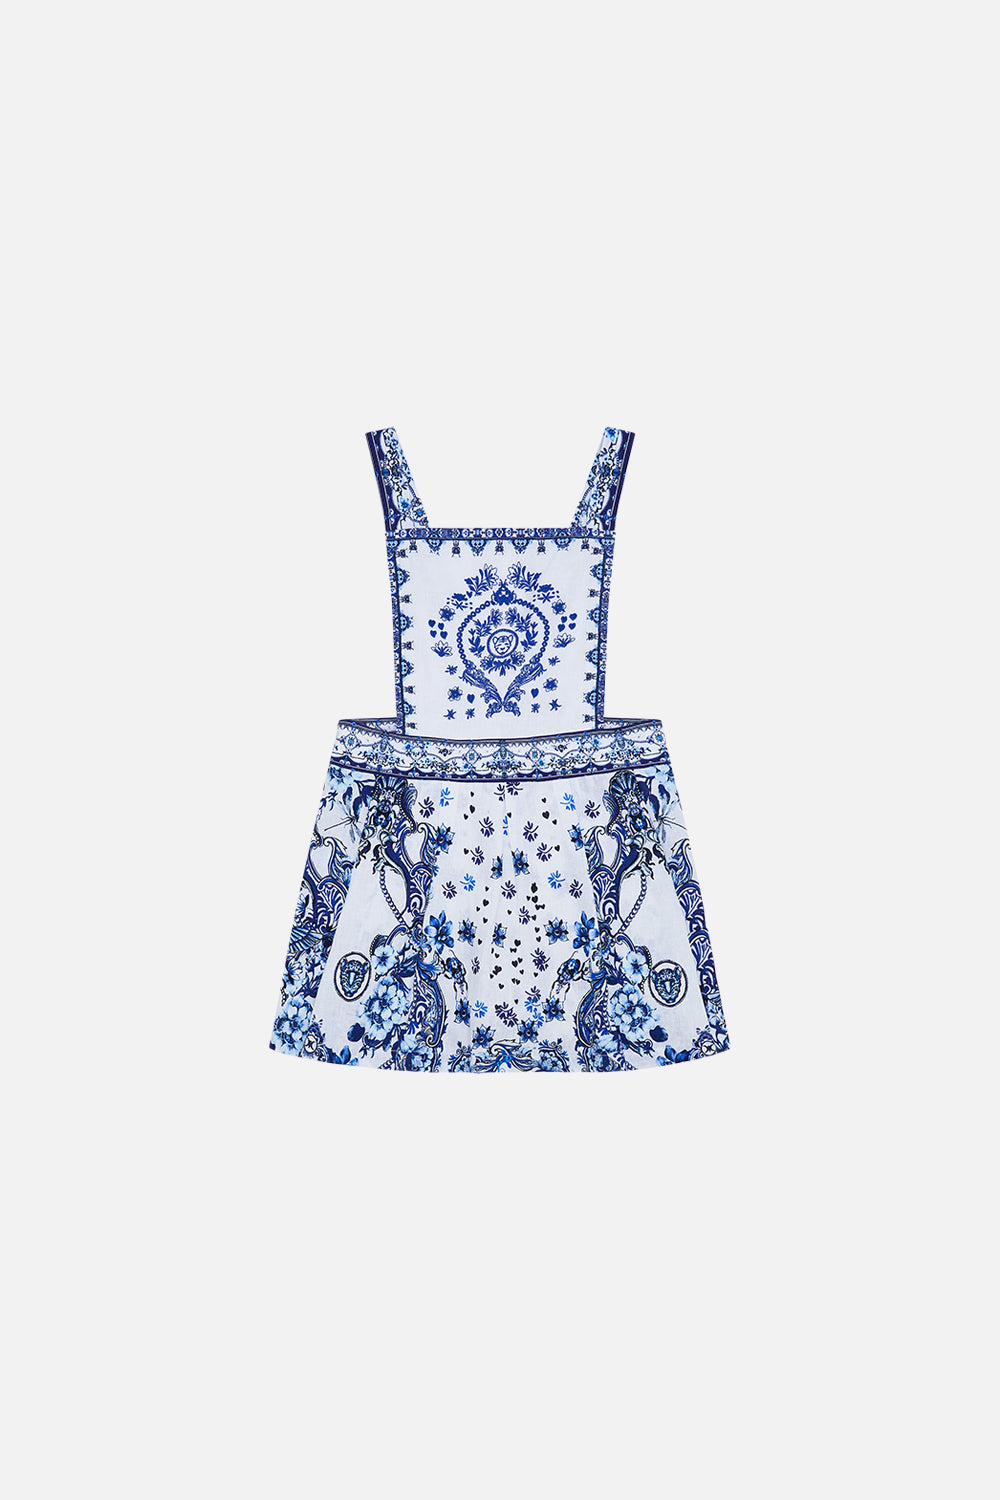 Front product view of Milla by CAMILLA kids pinafore in Glaze and Graze print